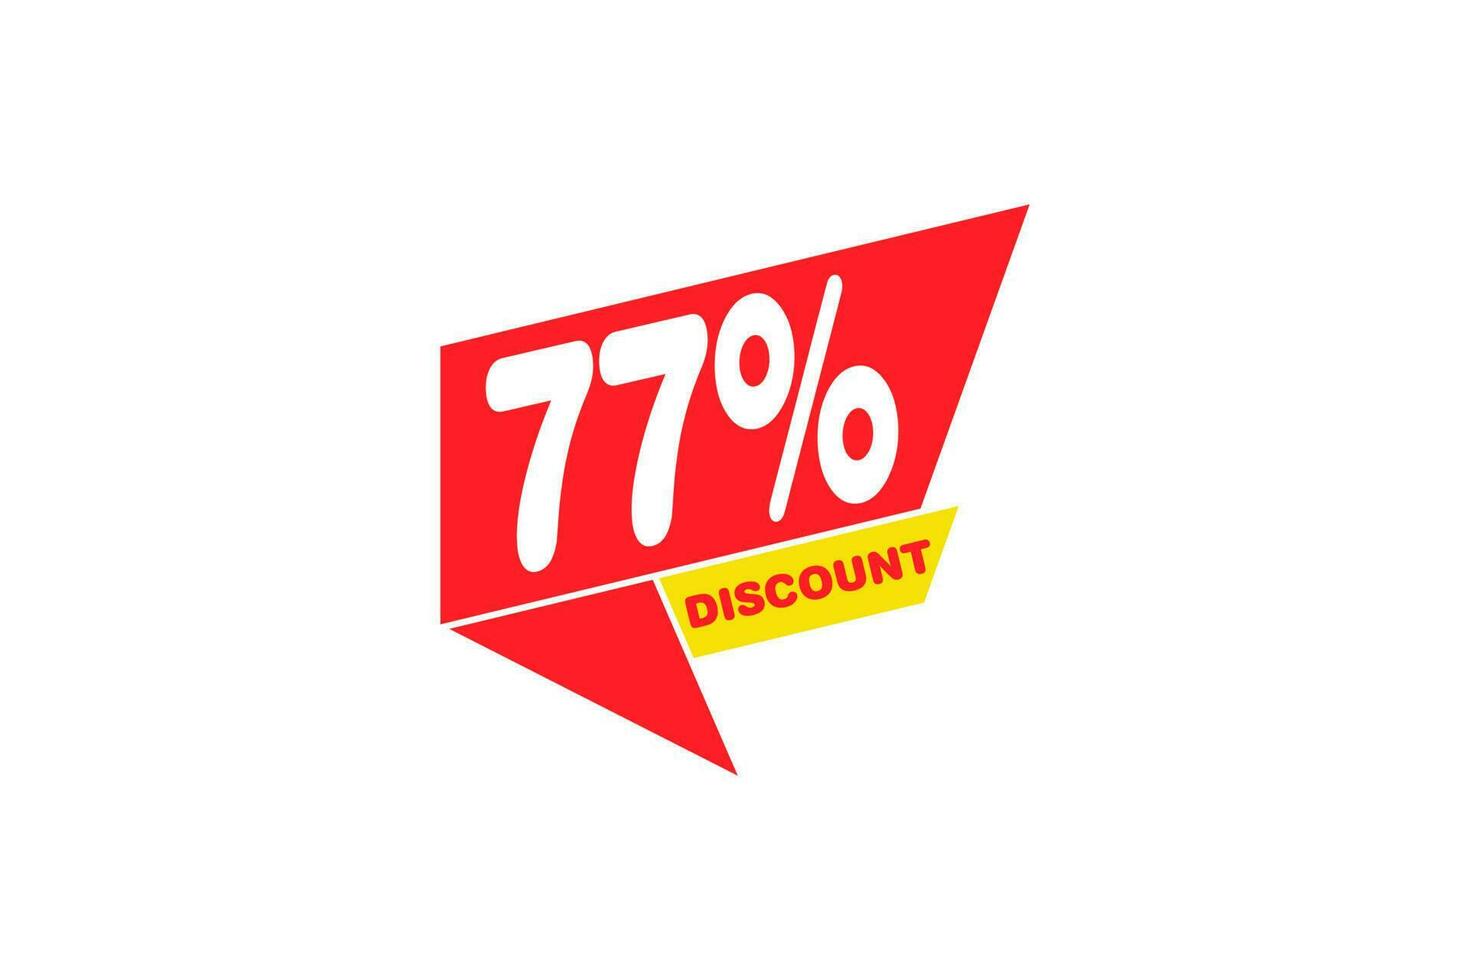 77 percent Sale and discount labels. price off tag icon flat design. vector